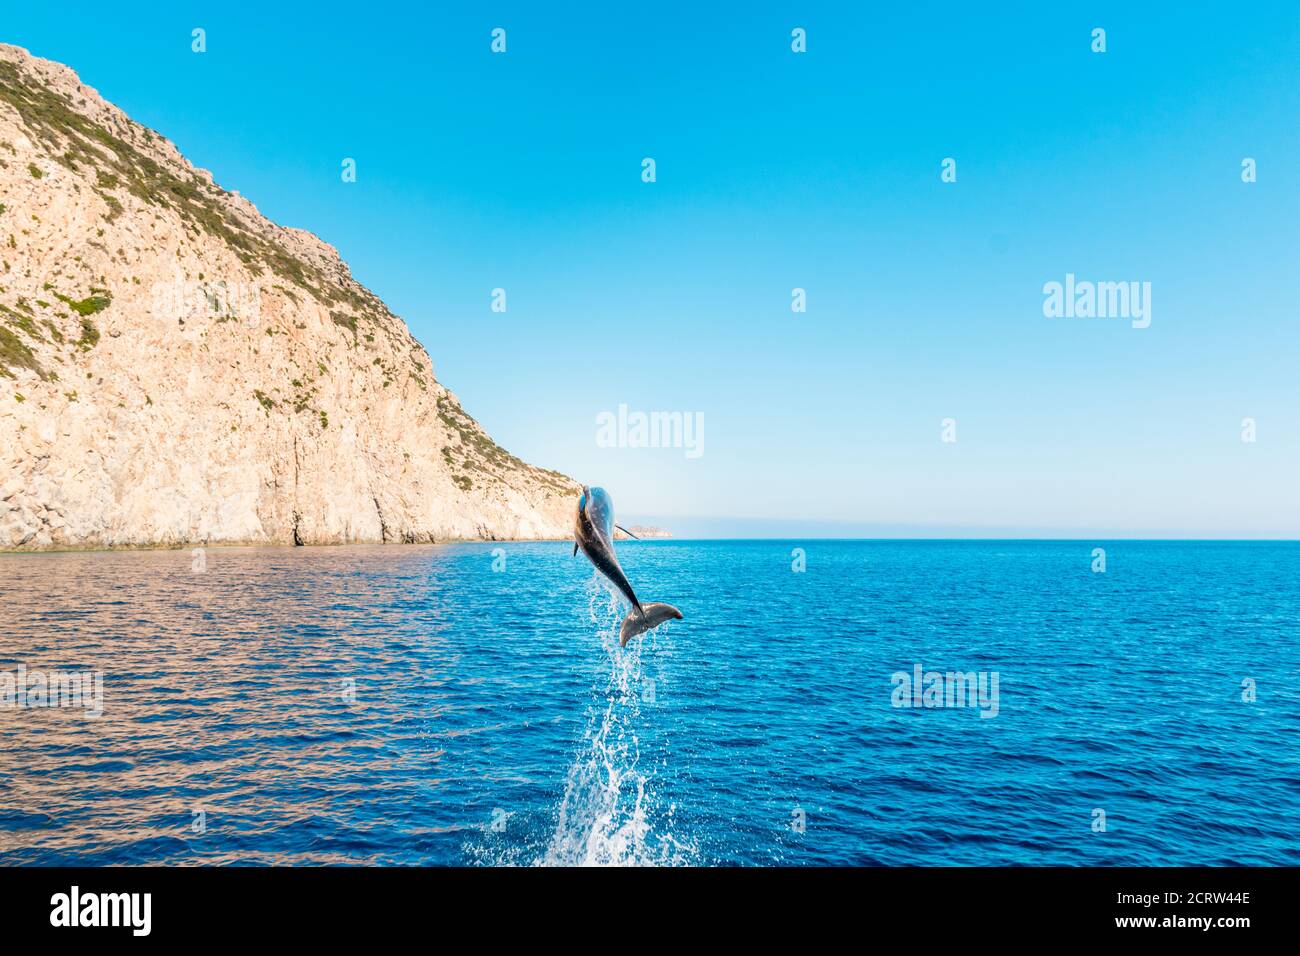 Dolphin jumping out of water on Karpathos Island, Greece Stock Photo